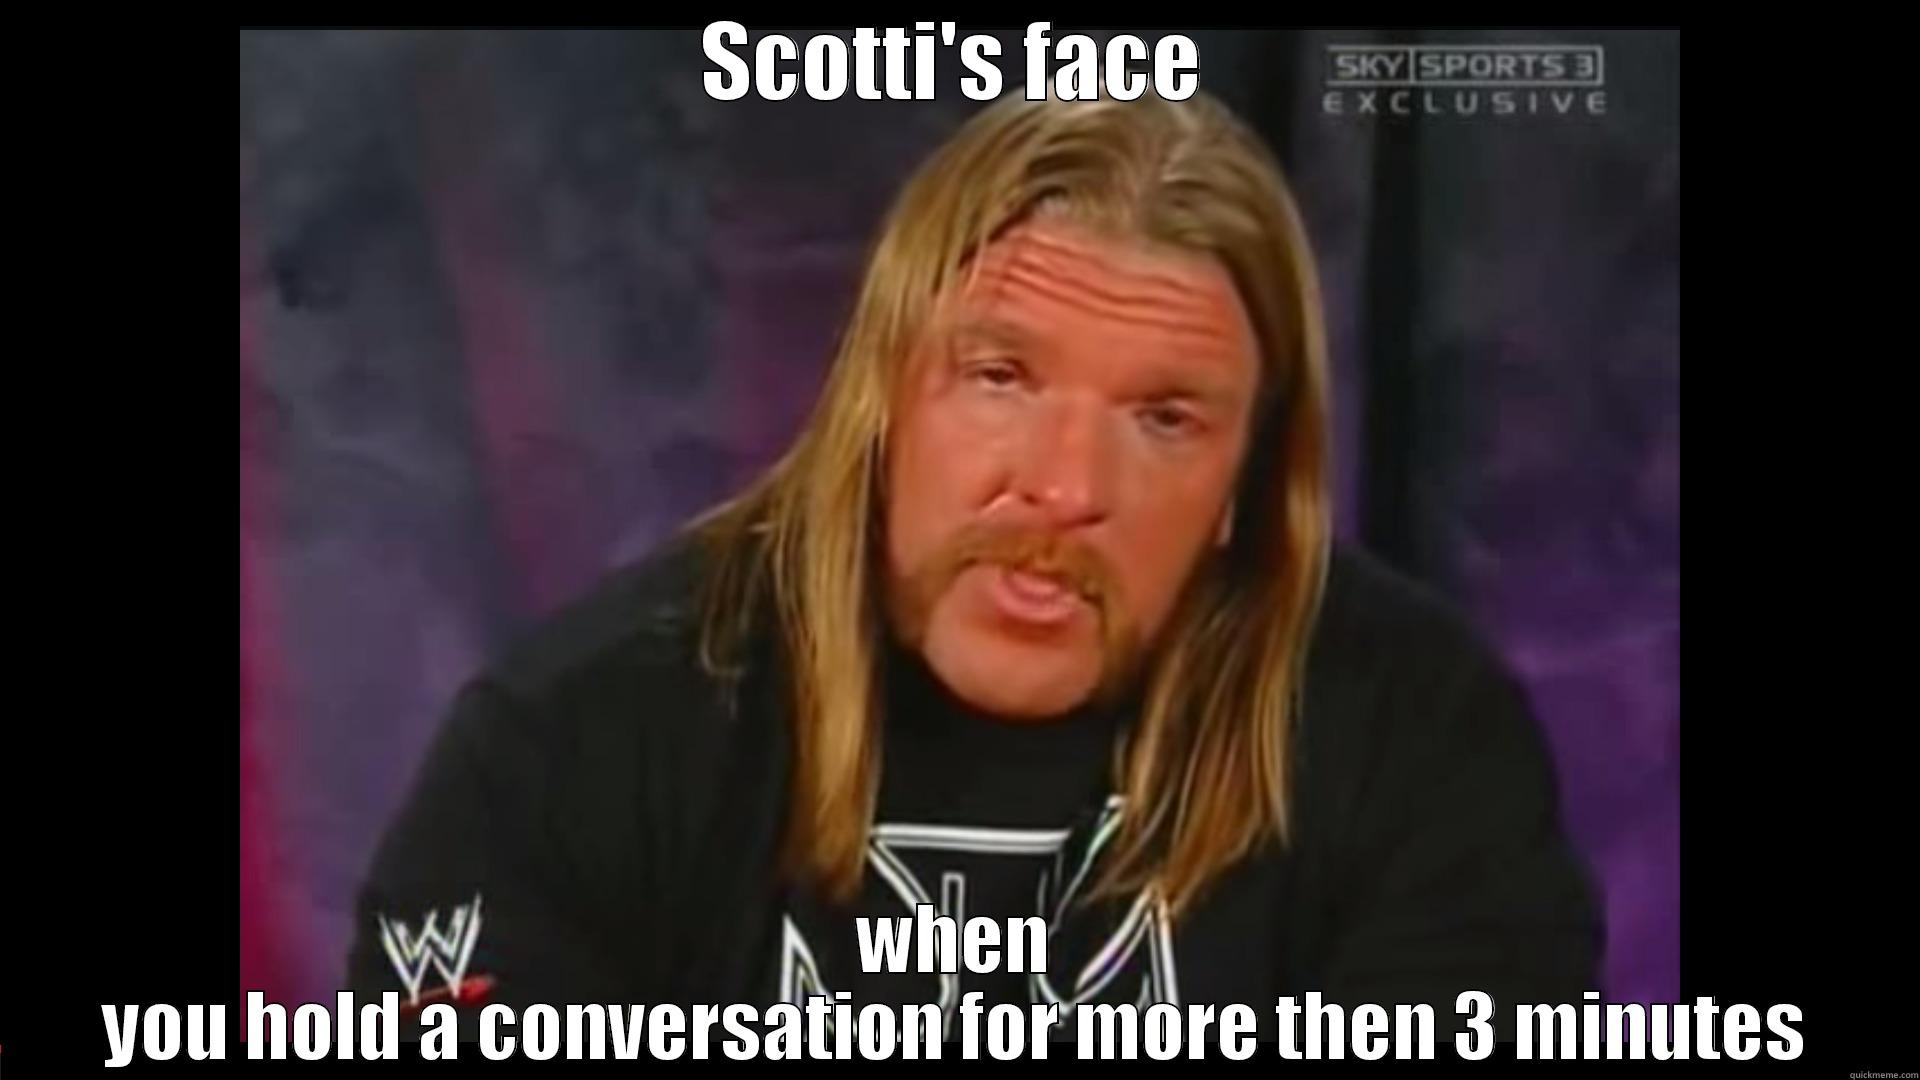 Scotti's face - SCOTTI'S FACE WHEN YOU HOLD A CONVERSATION FOR MORE THEN 3 MINUTES Misc